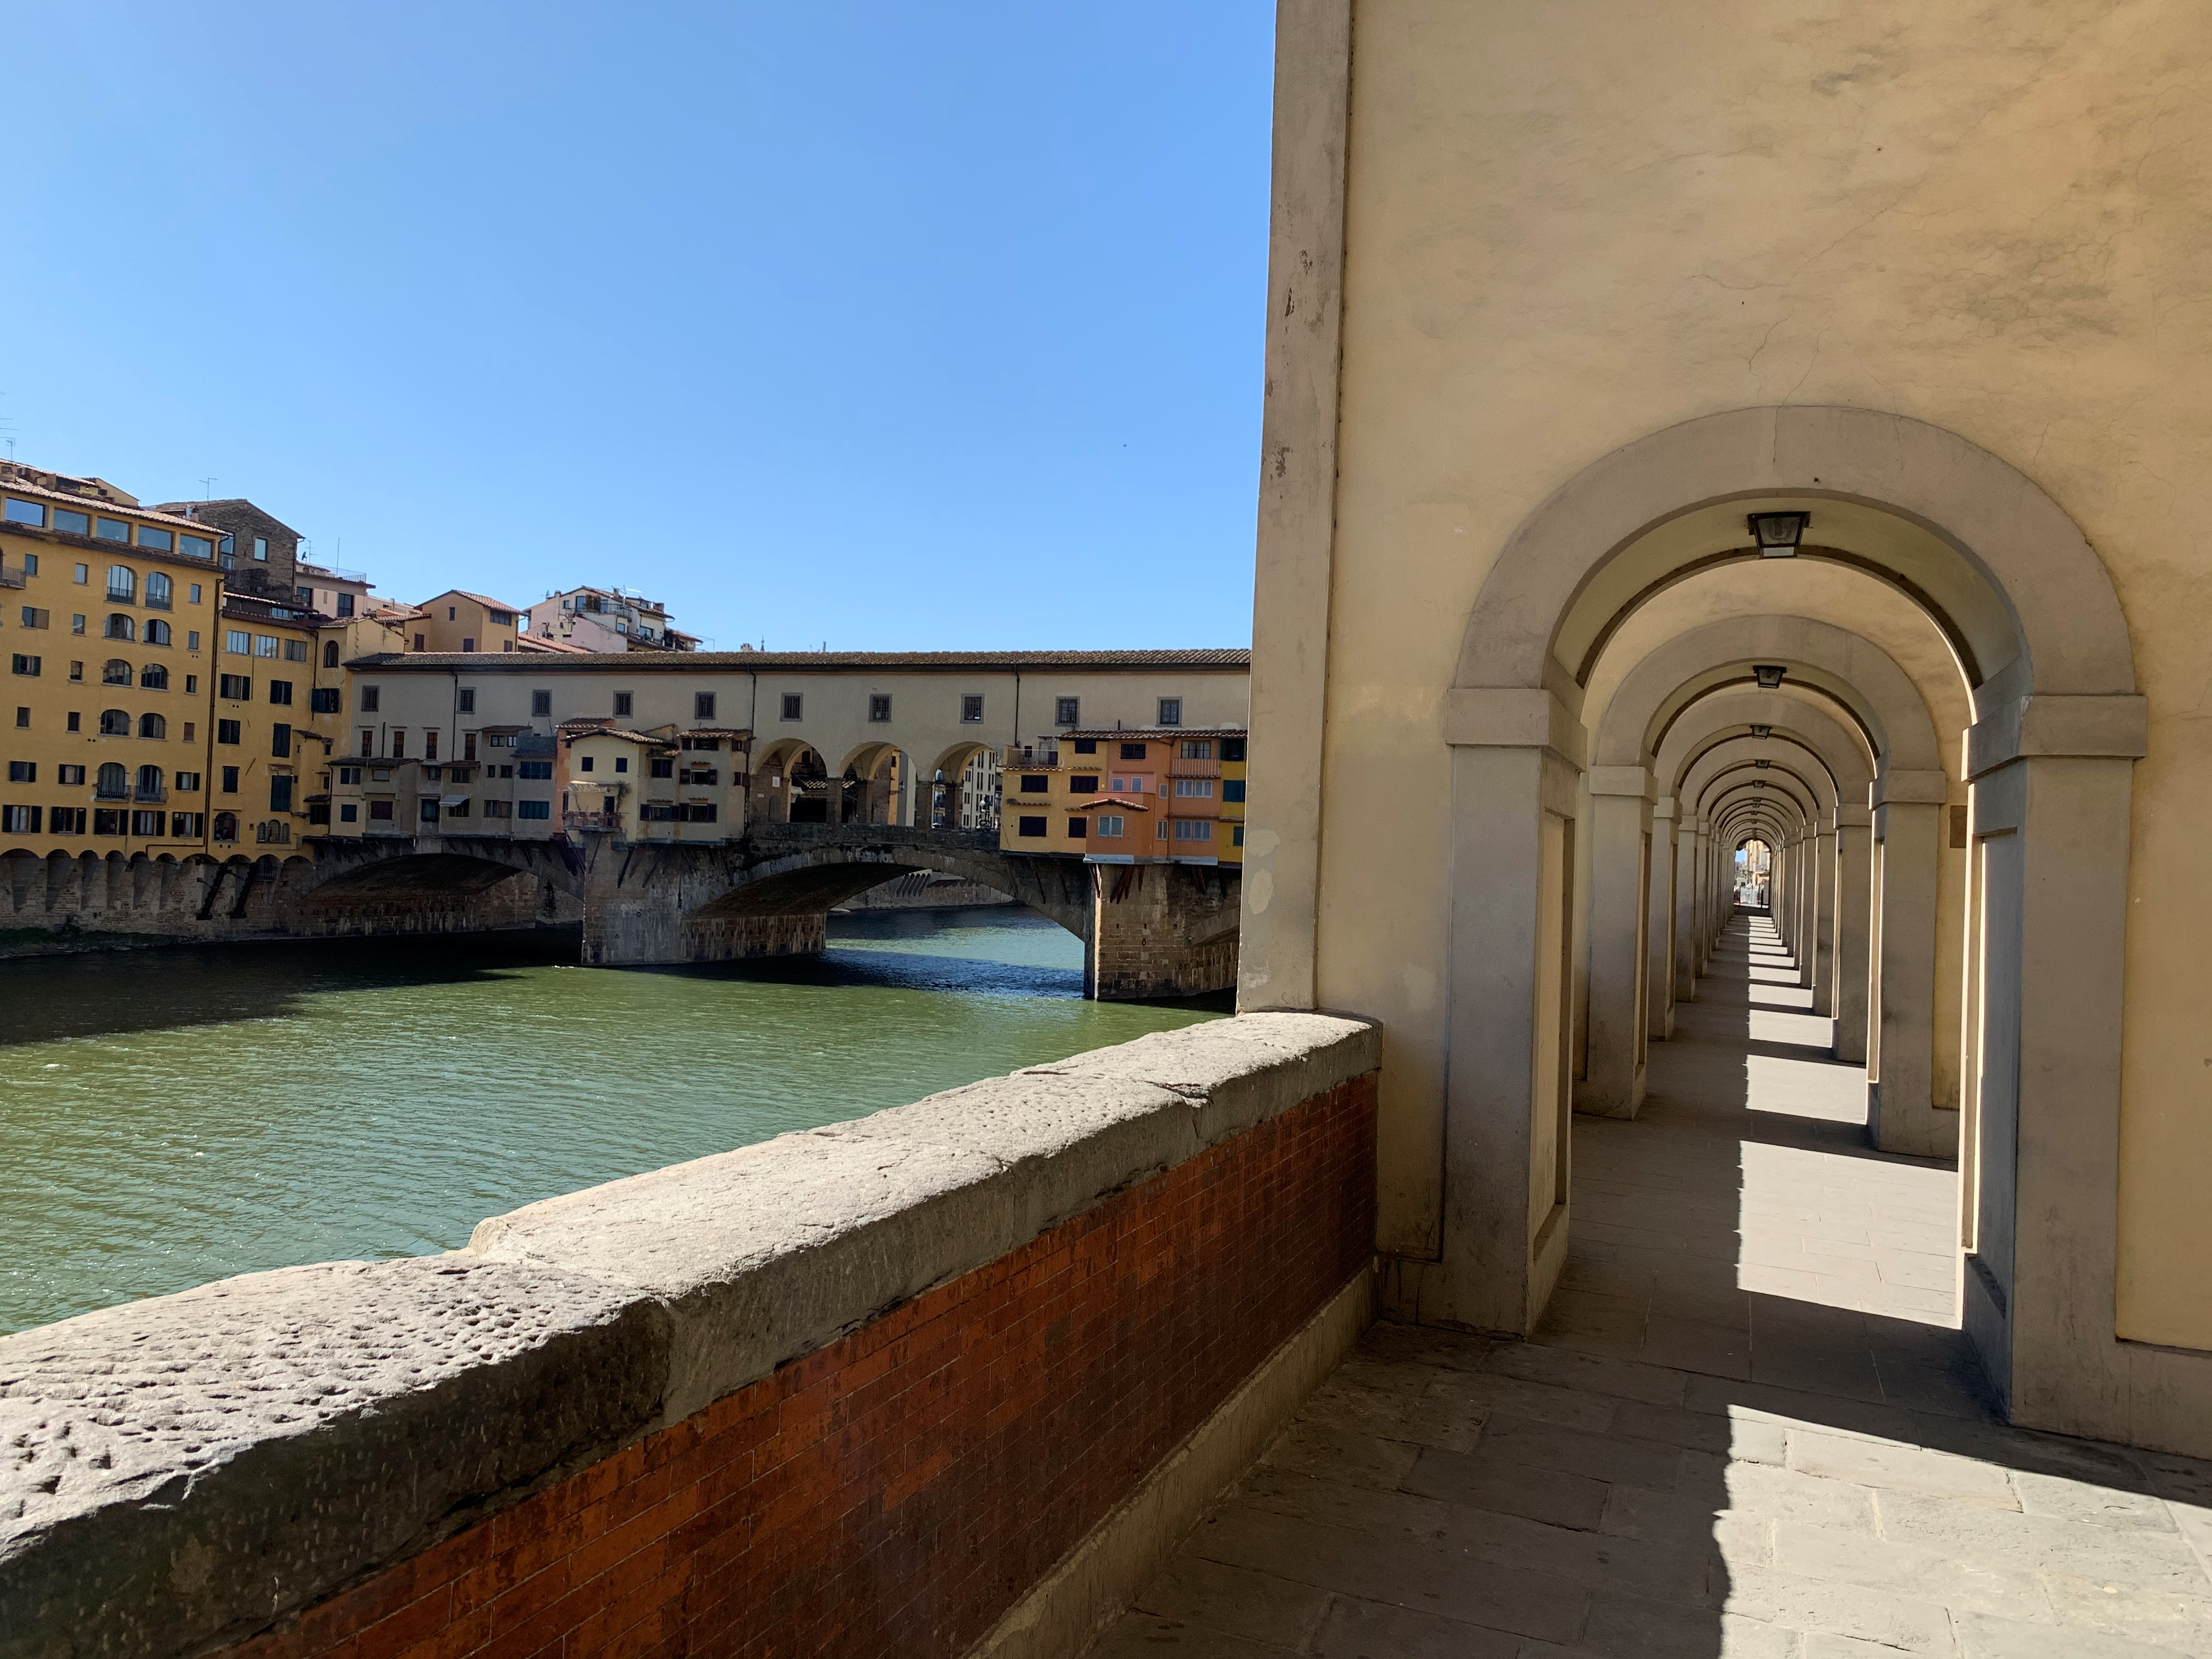 The works for the reopening of the Vasari Corridor of the Uffizi Galleries are about to start